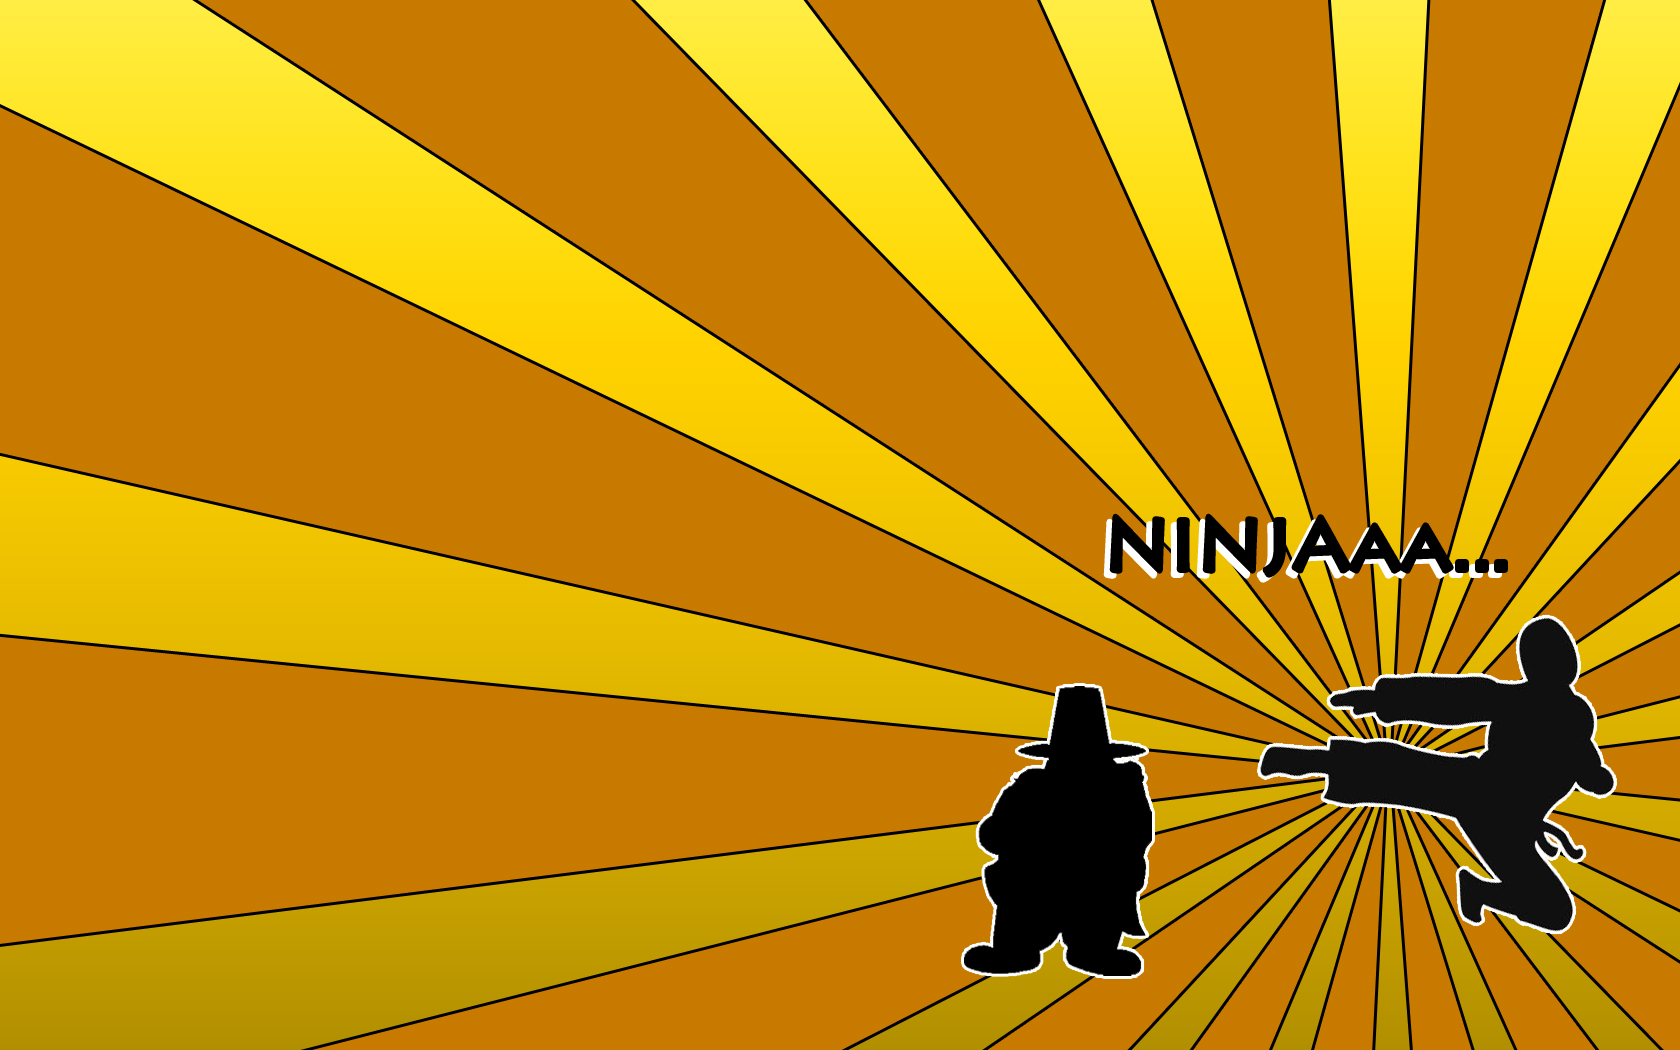 Ninja desktop wallpaper with funny design created by Imre and inspired by Roger Dean